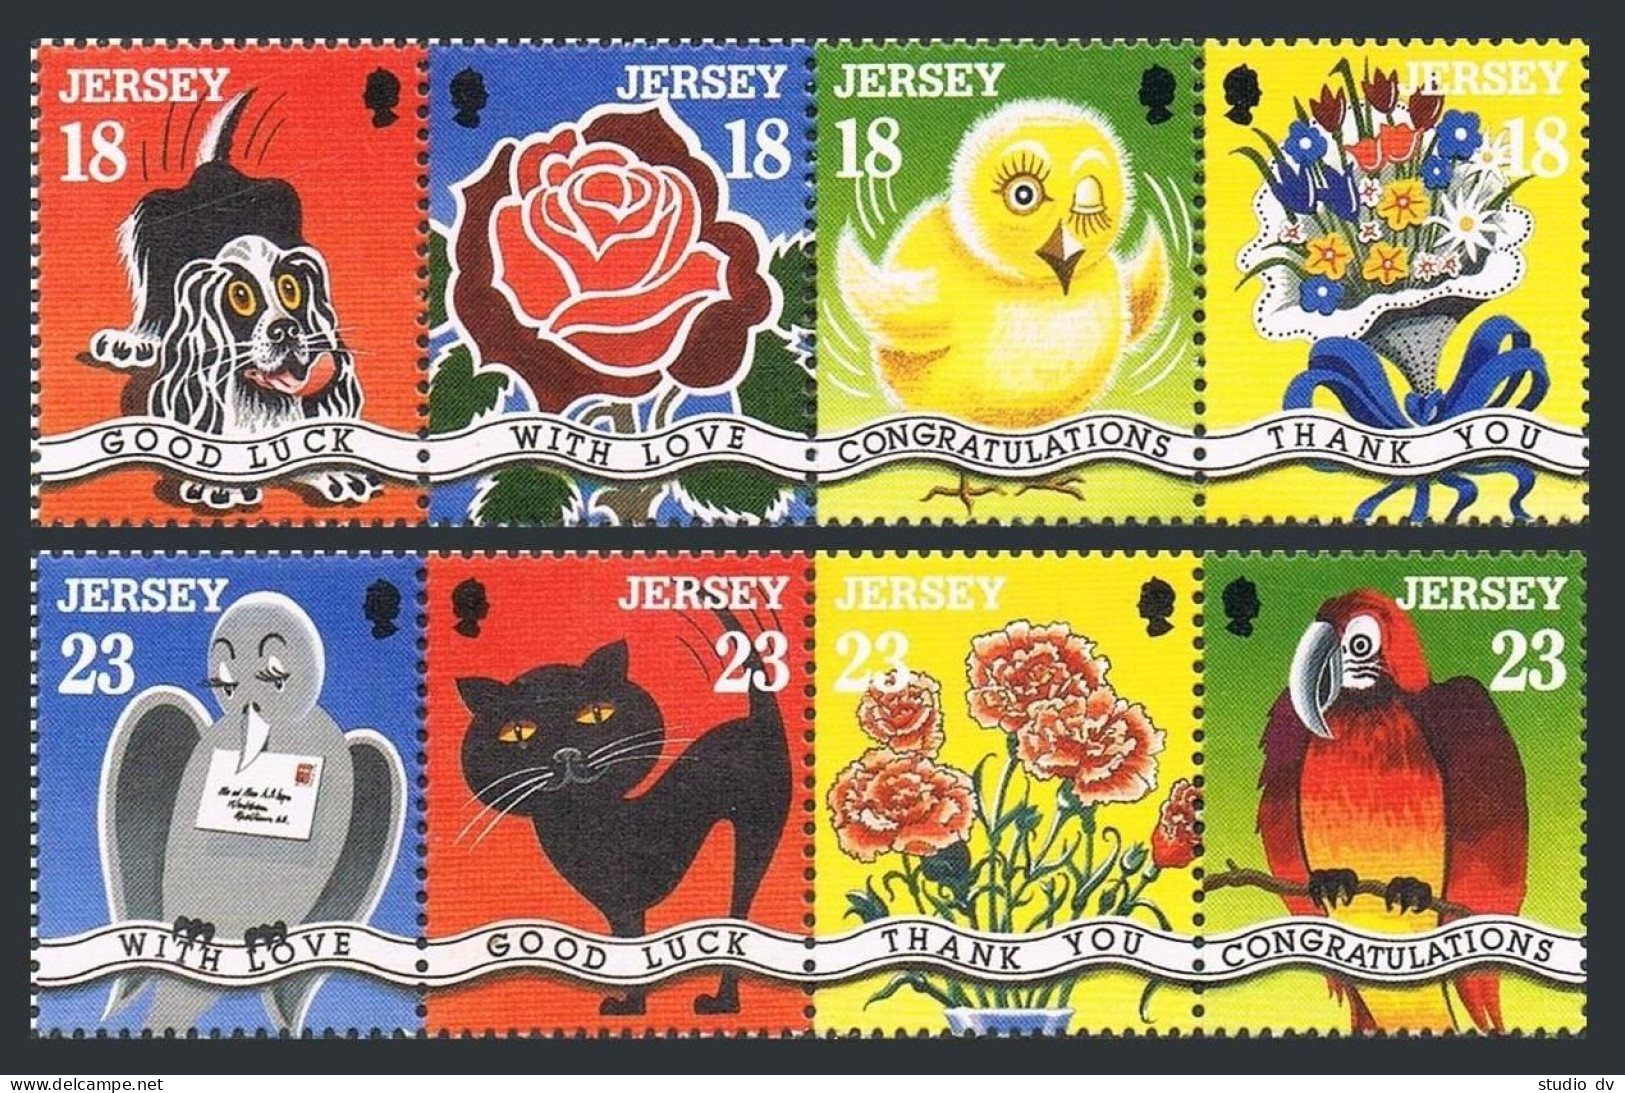 Jersey 694-702a Pane,697a,701a Strips,MNH. Greetings Stamps 1995.Dog,Rose,Boar. - Jersey